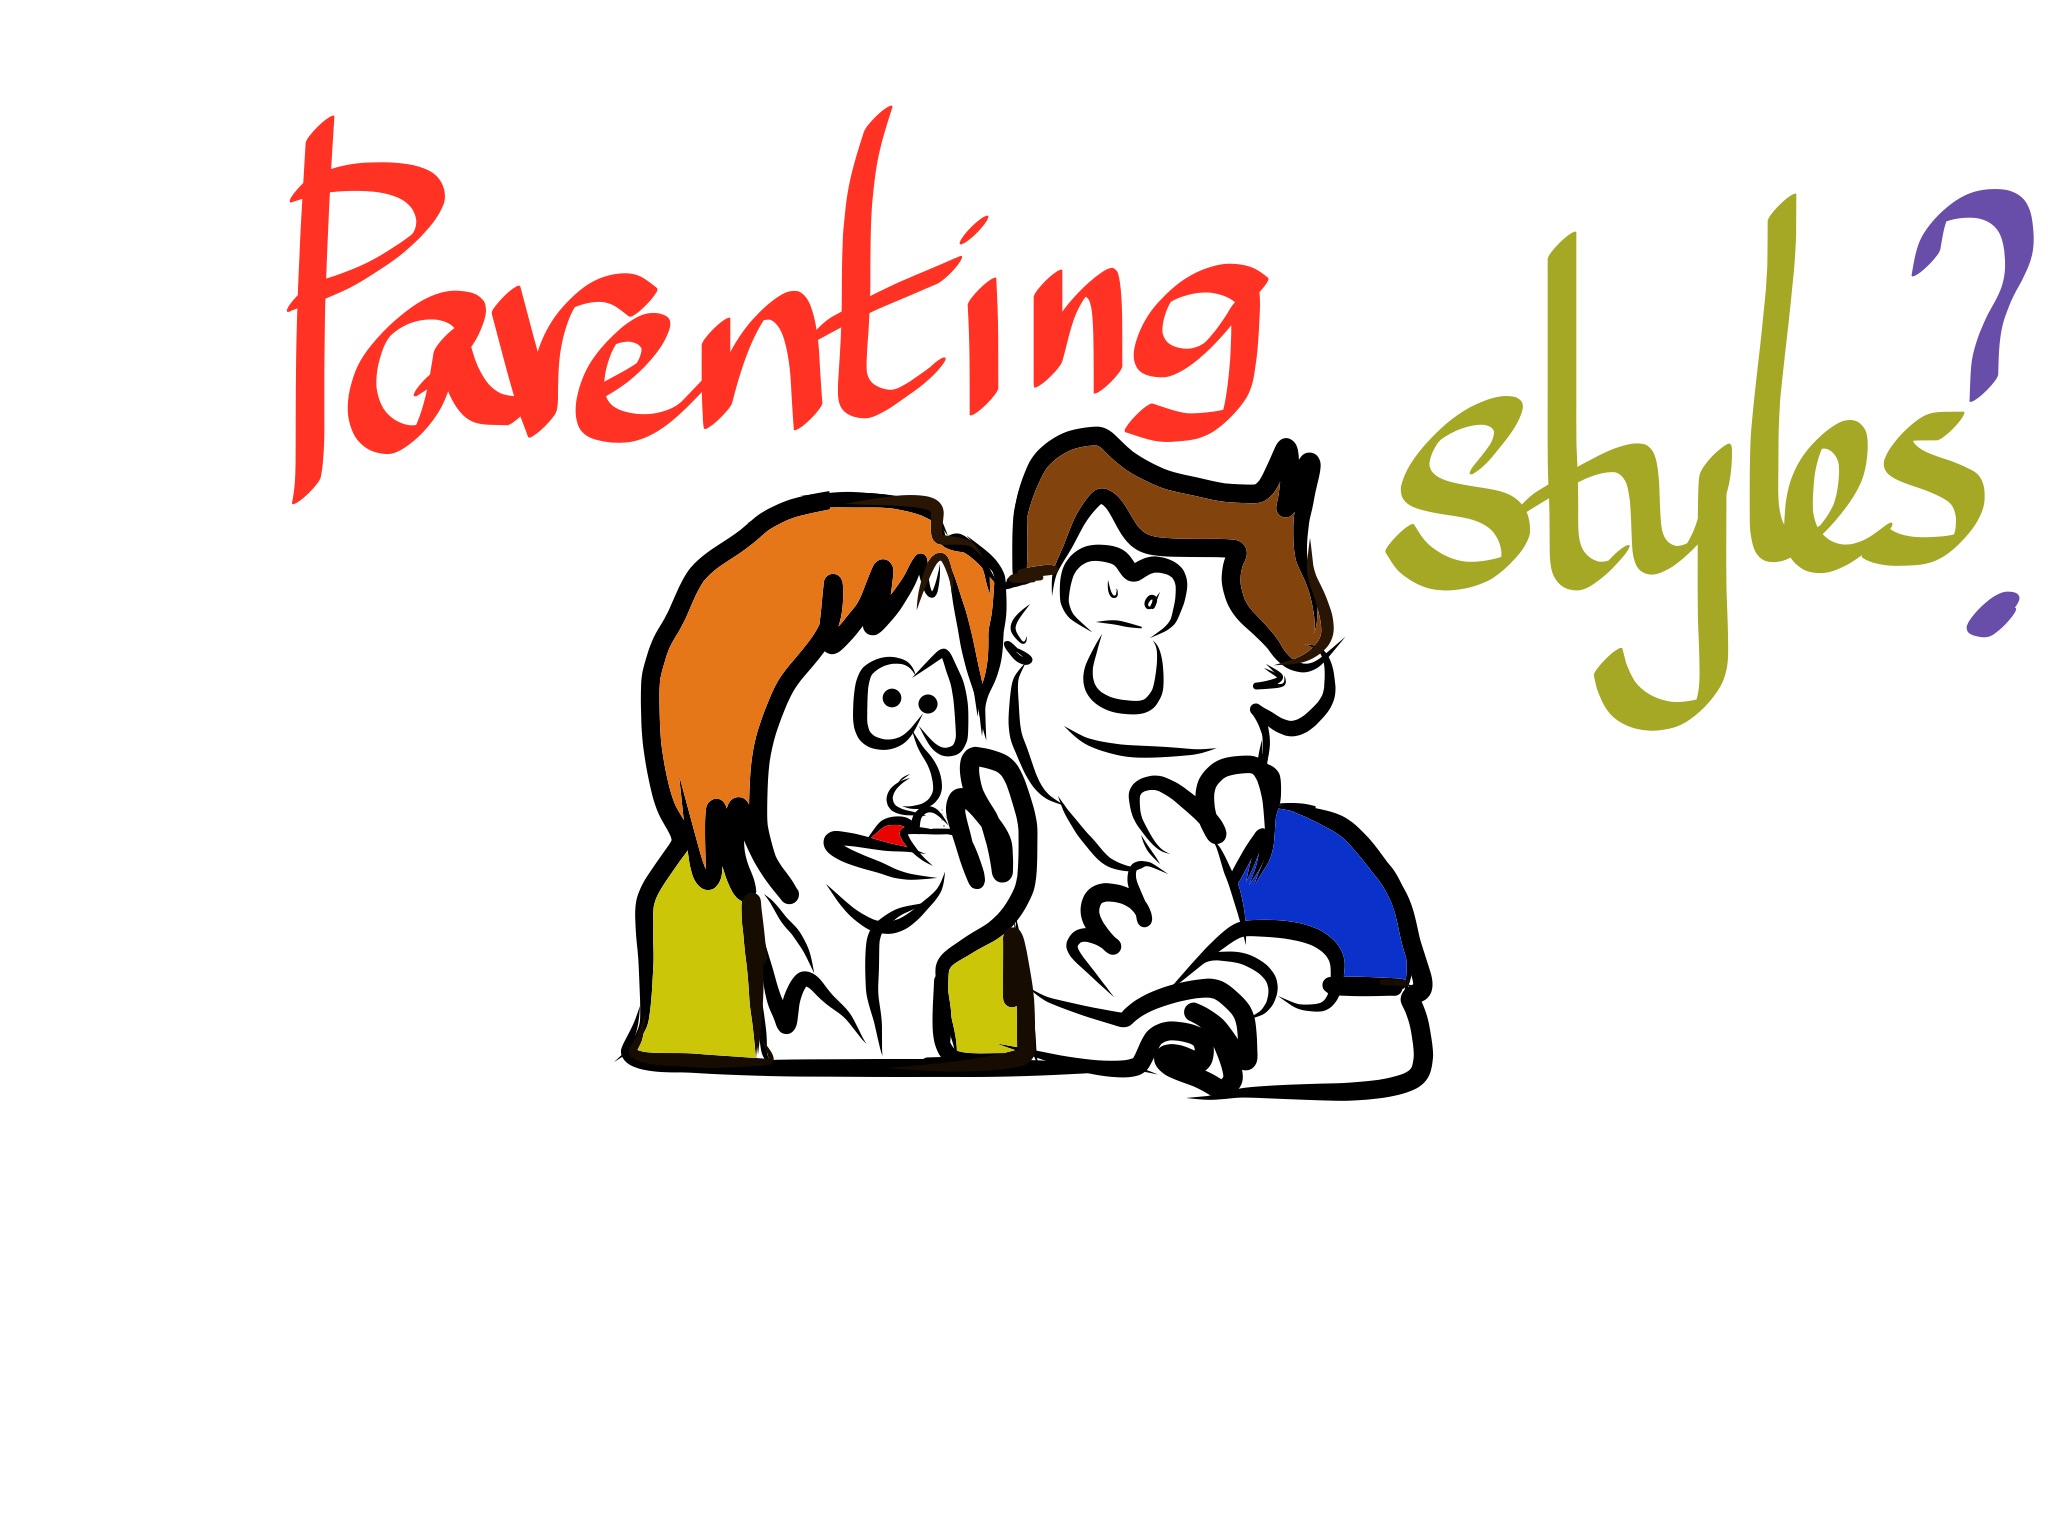 What Parenting Style do you use?